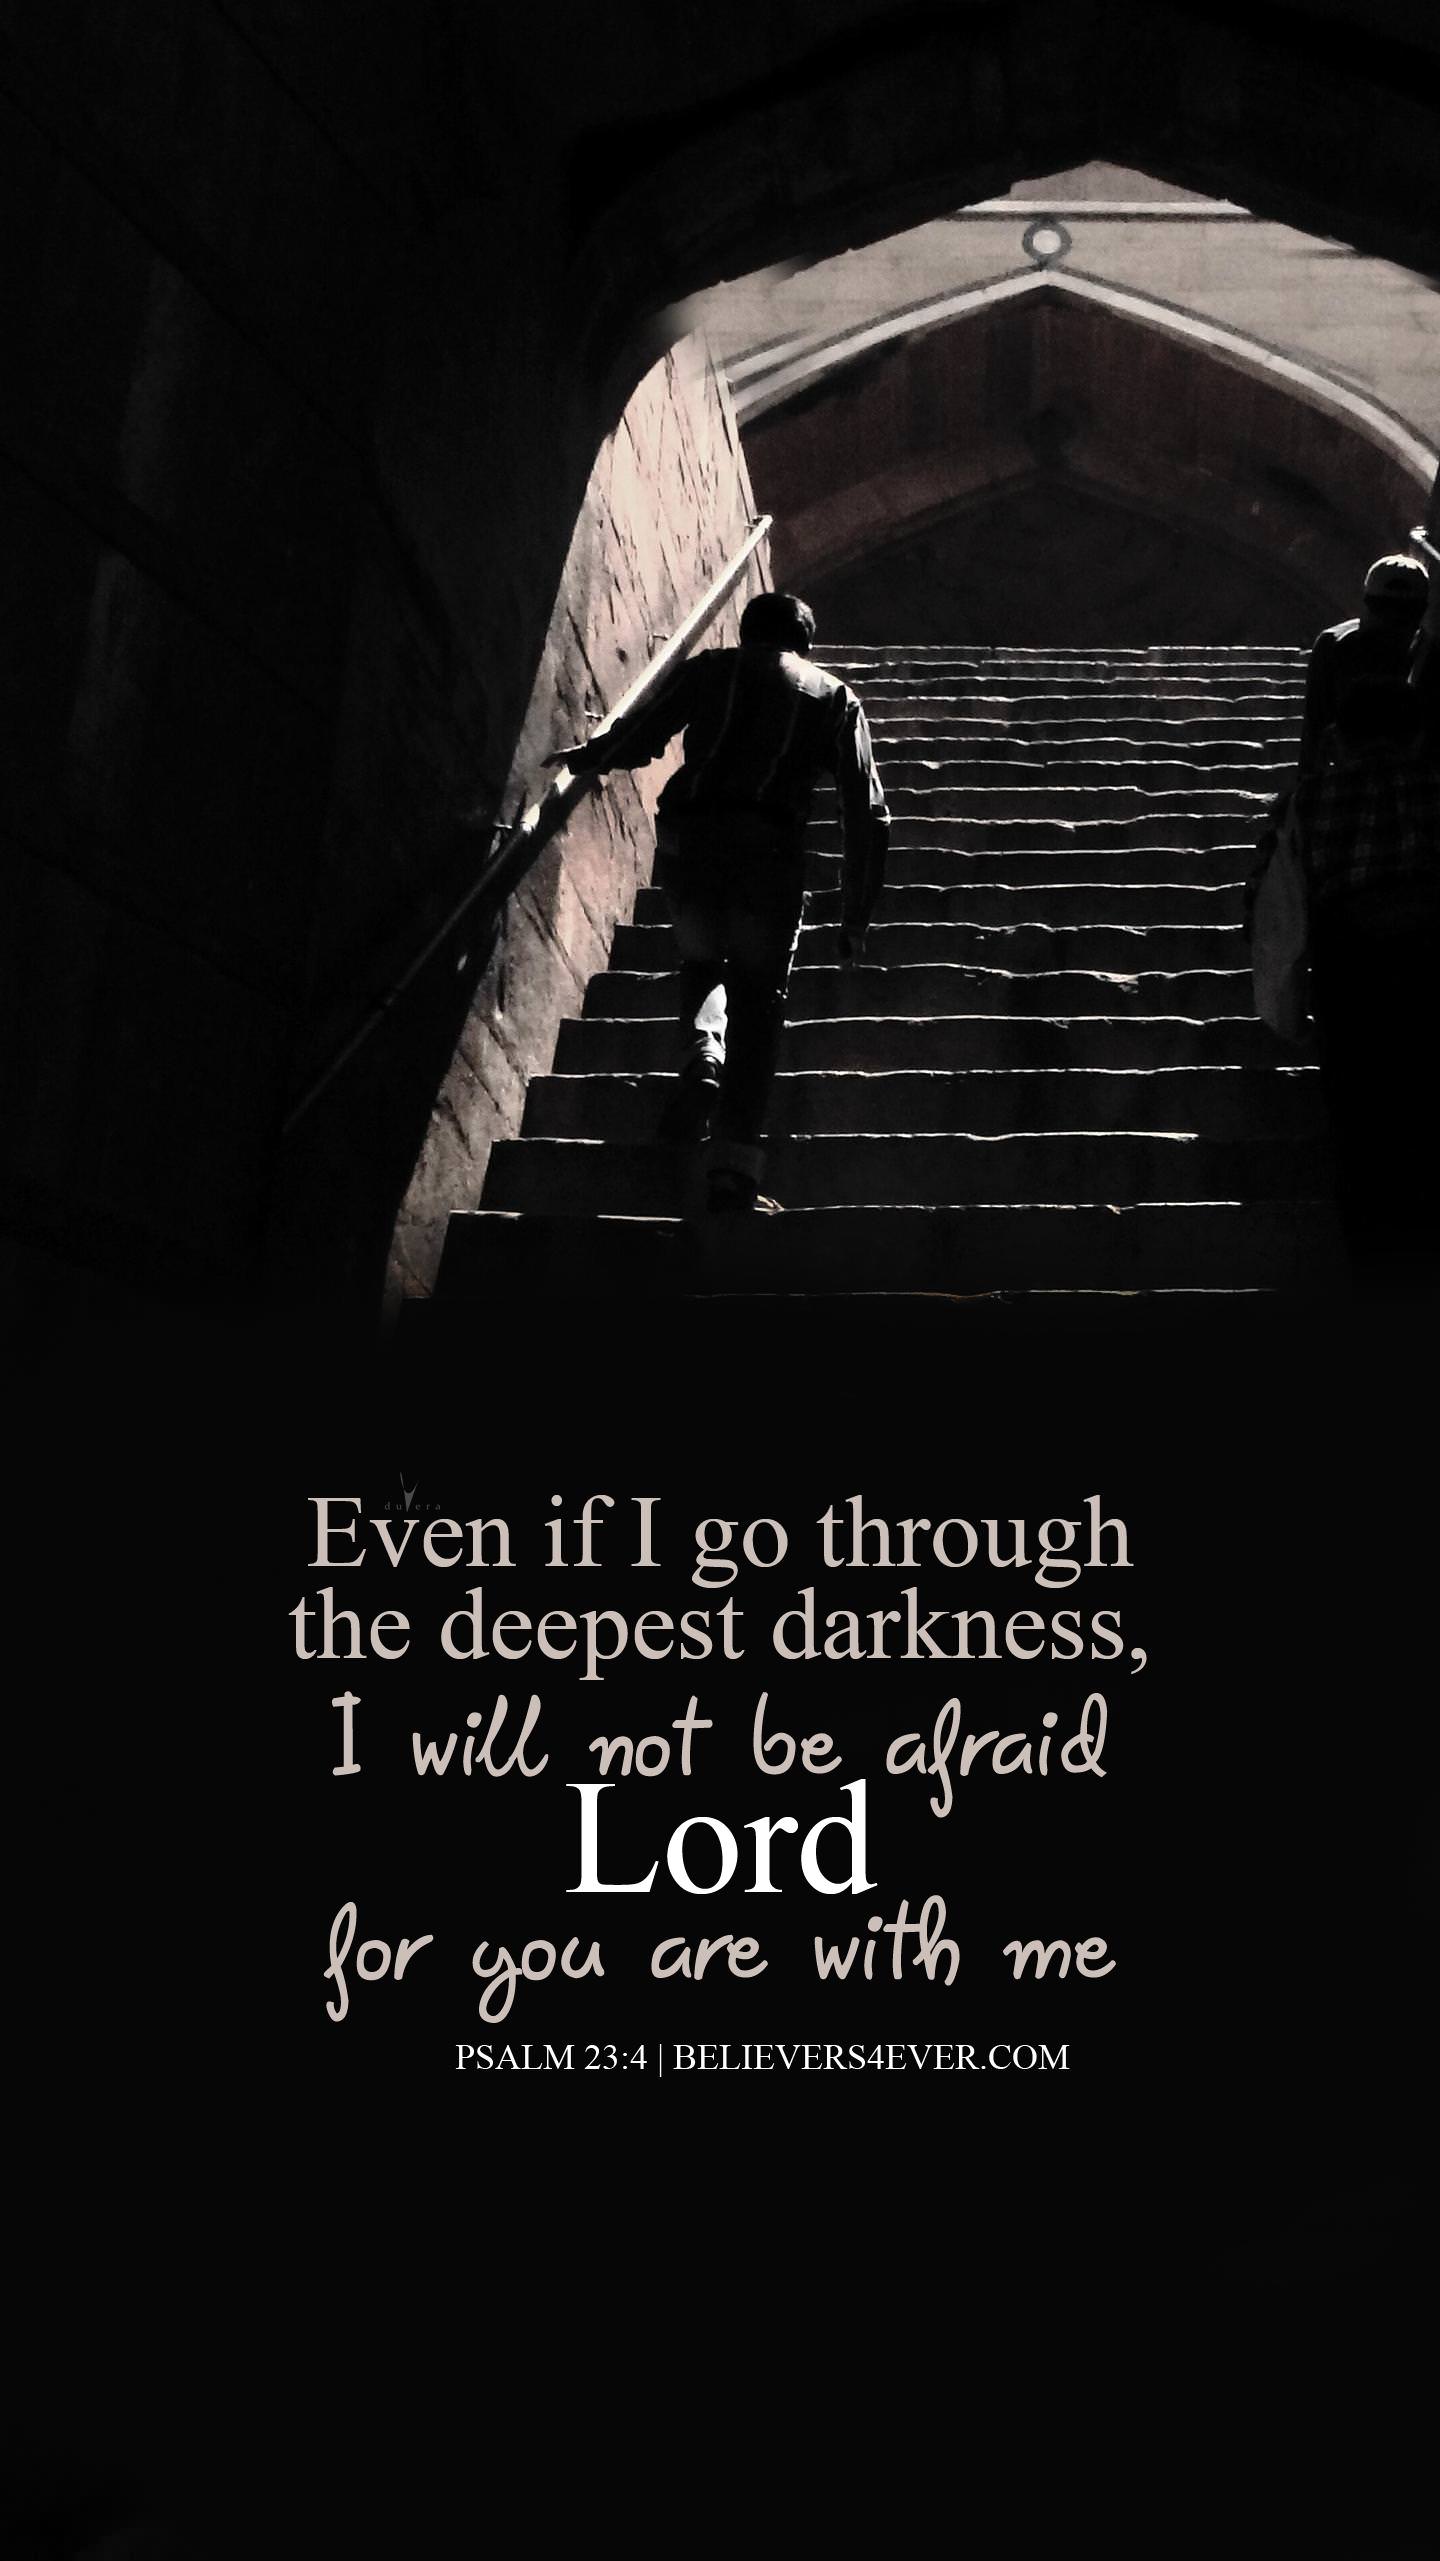 The deepest darkness